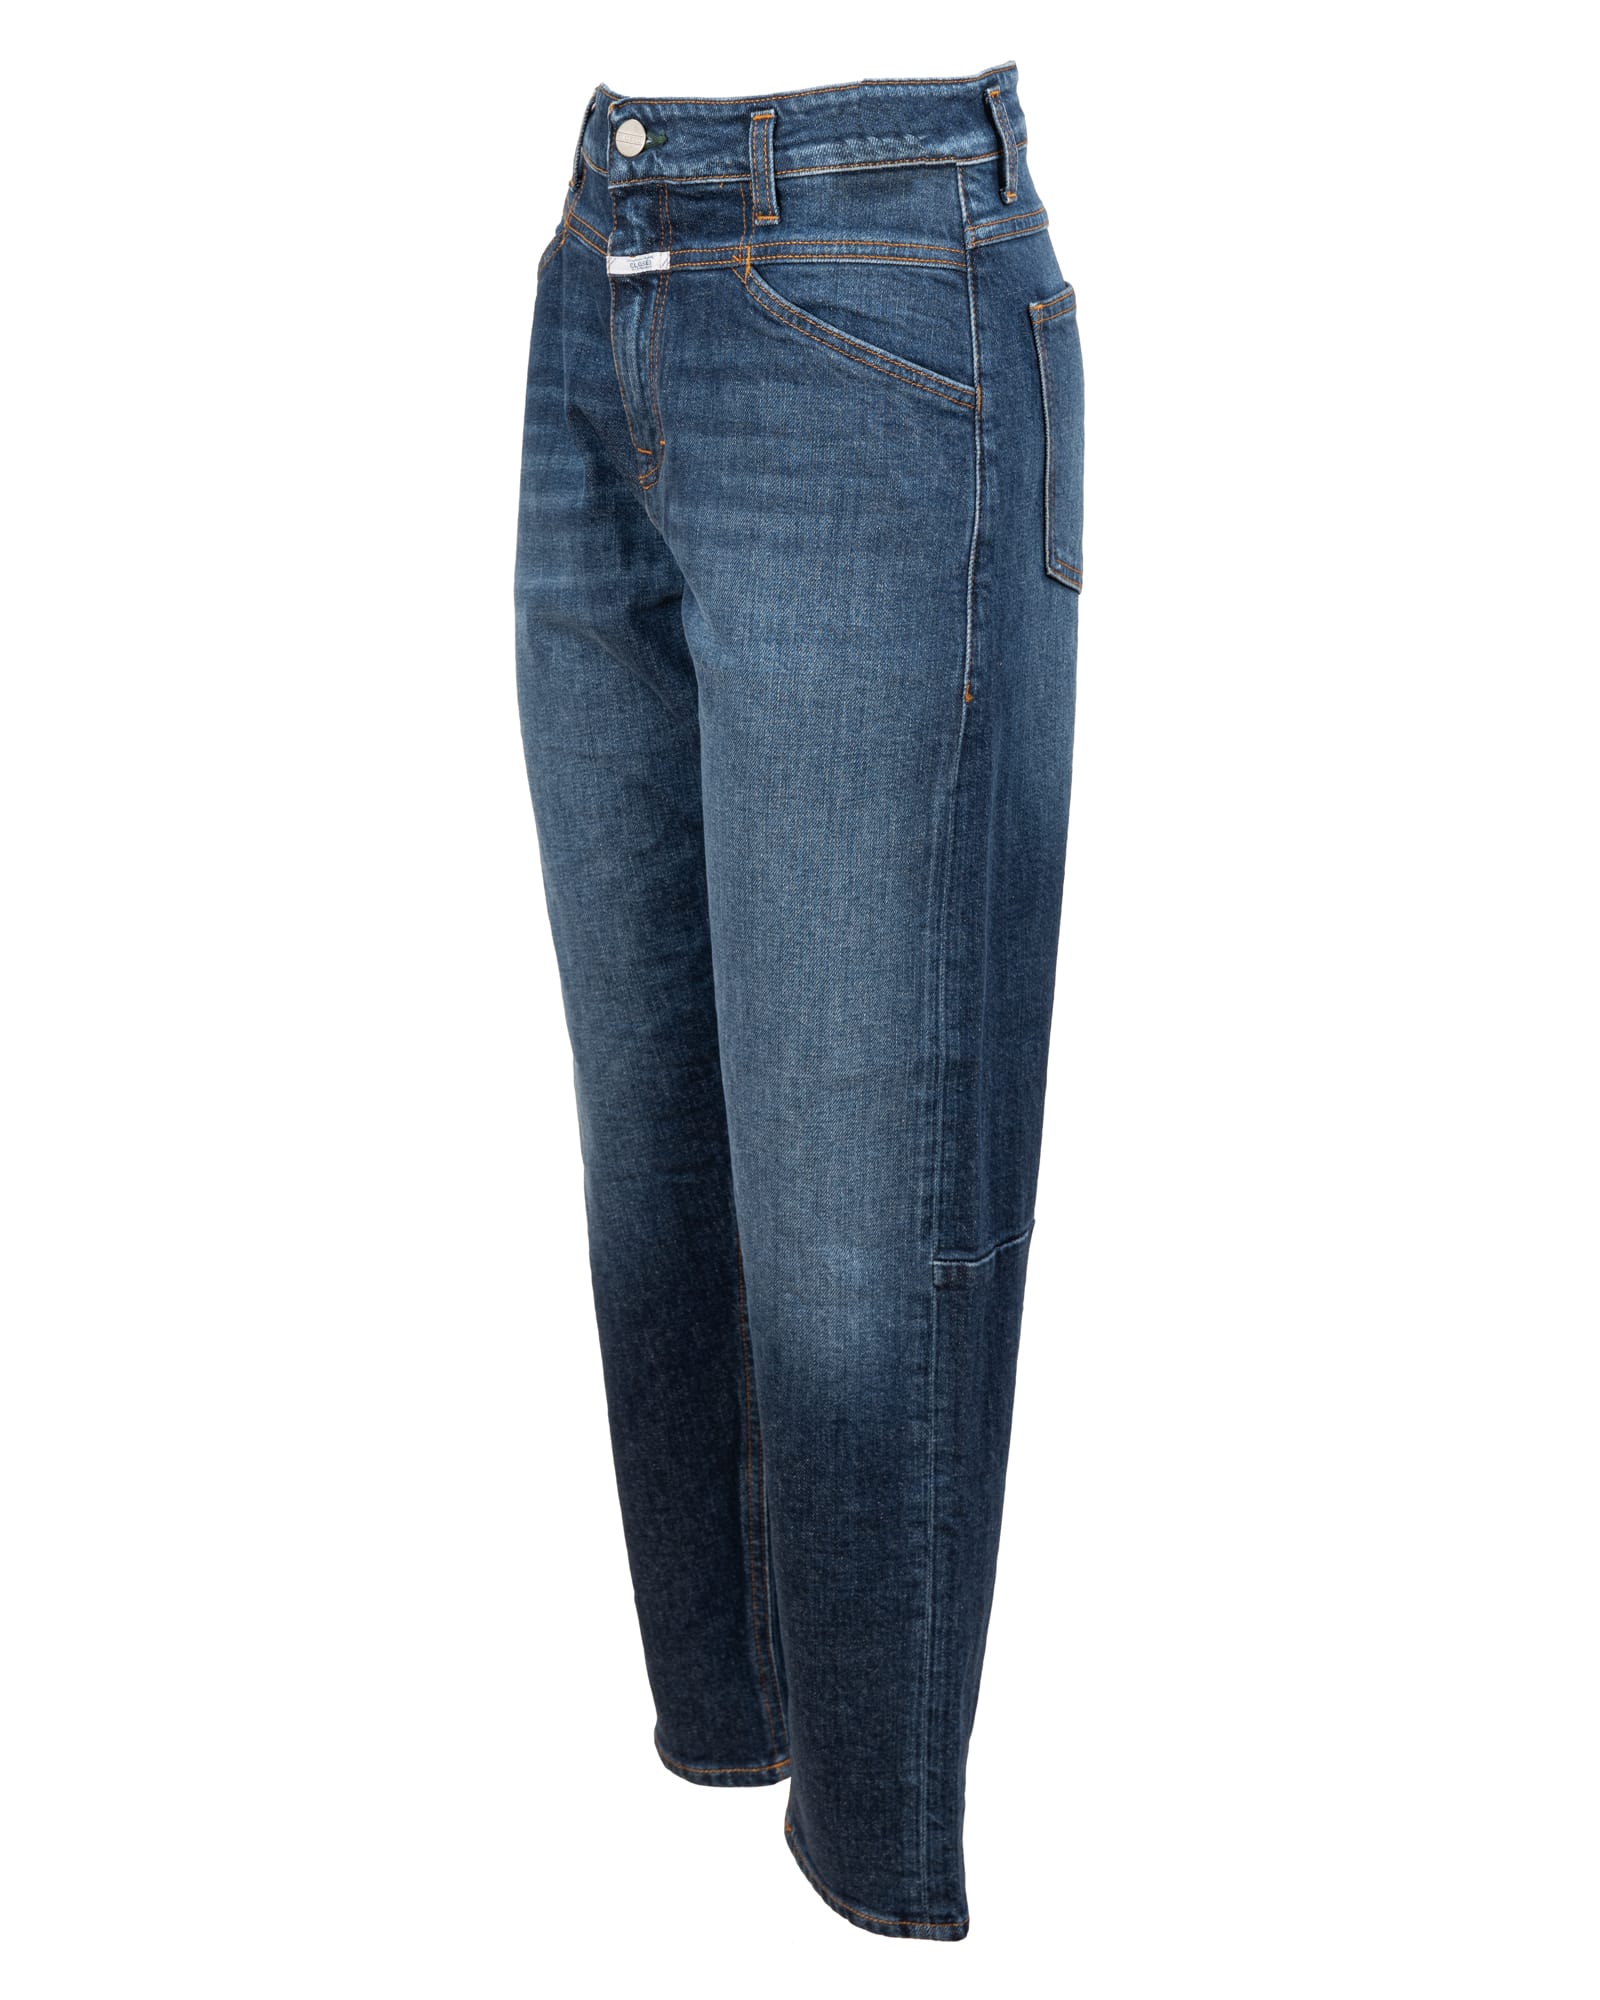 Closed X-pocket jeans made of medium weight eco denim, about 11 ounces